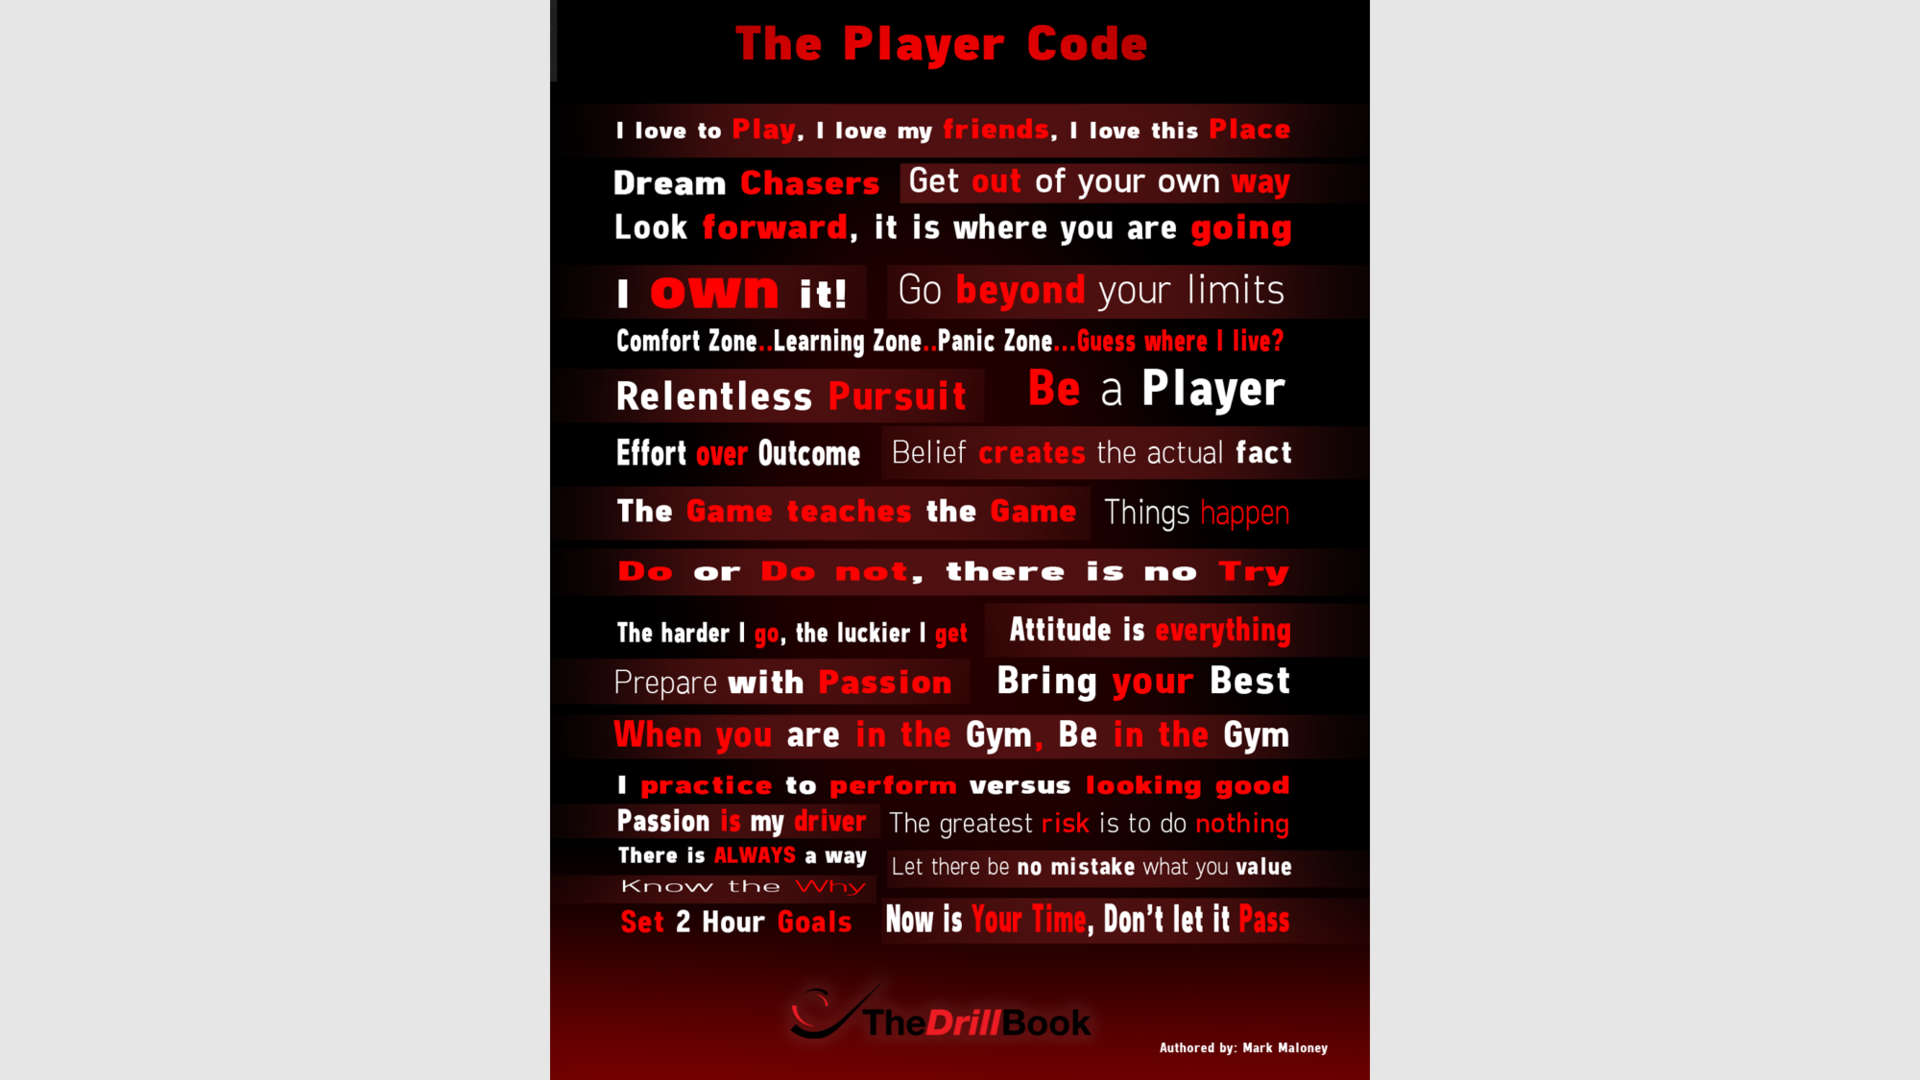 The Player Code